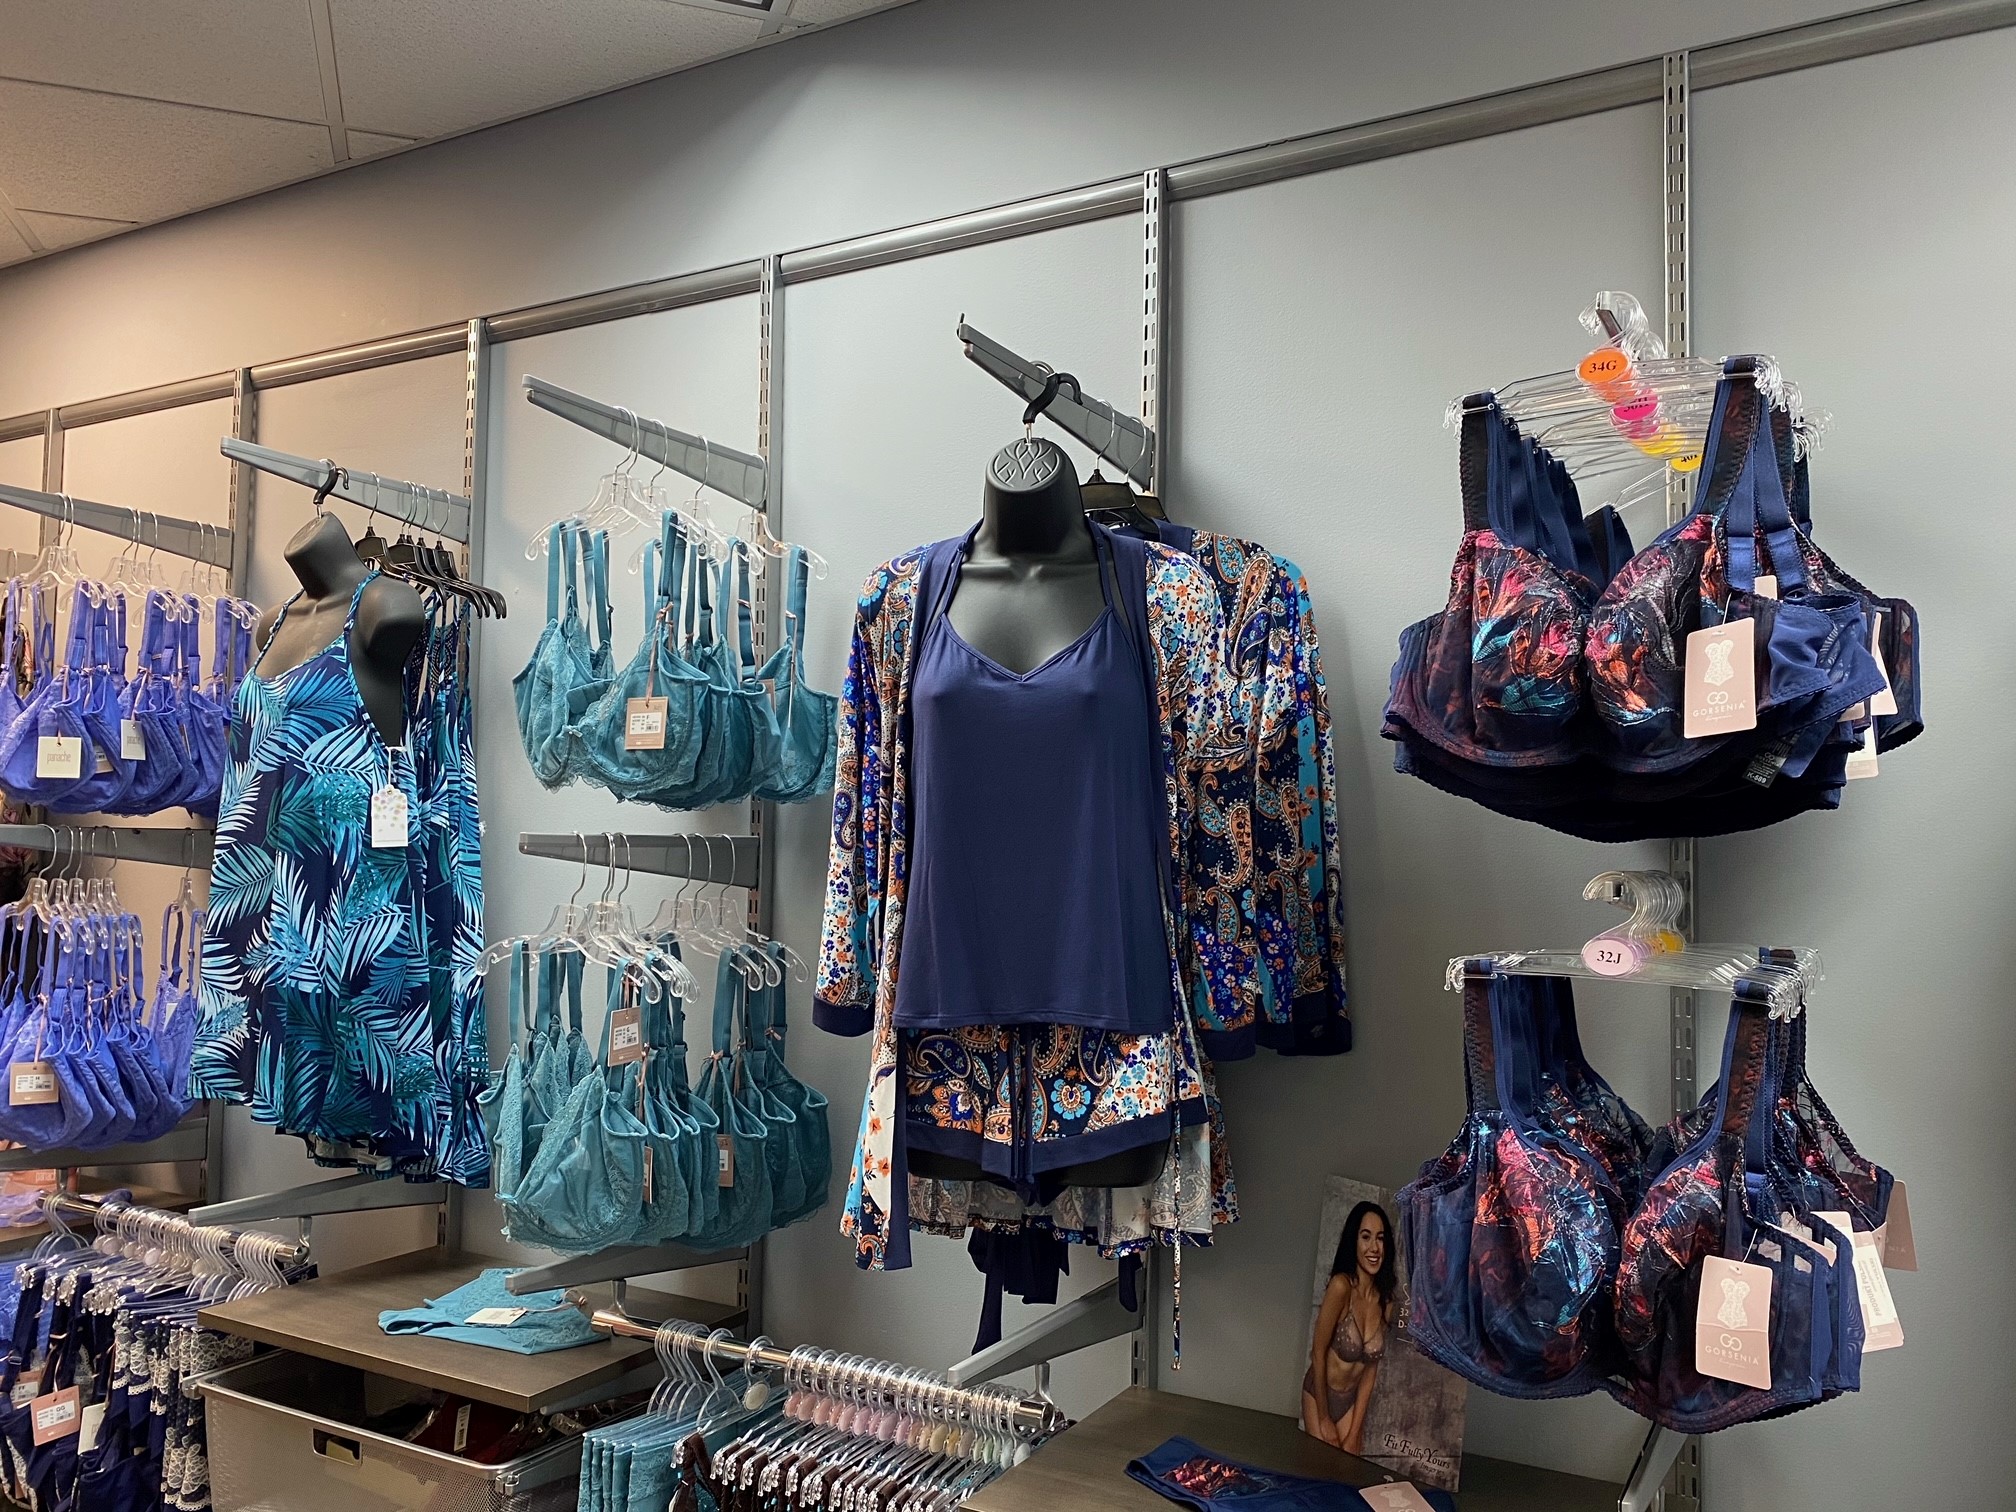 Contact-free bra fit service at M&S stores in England - iXtenso – retail  trends